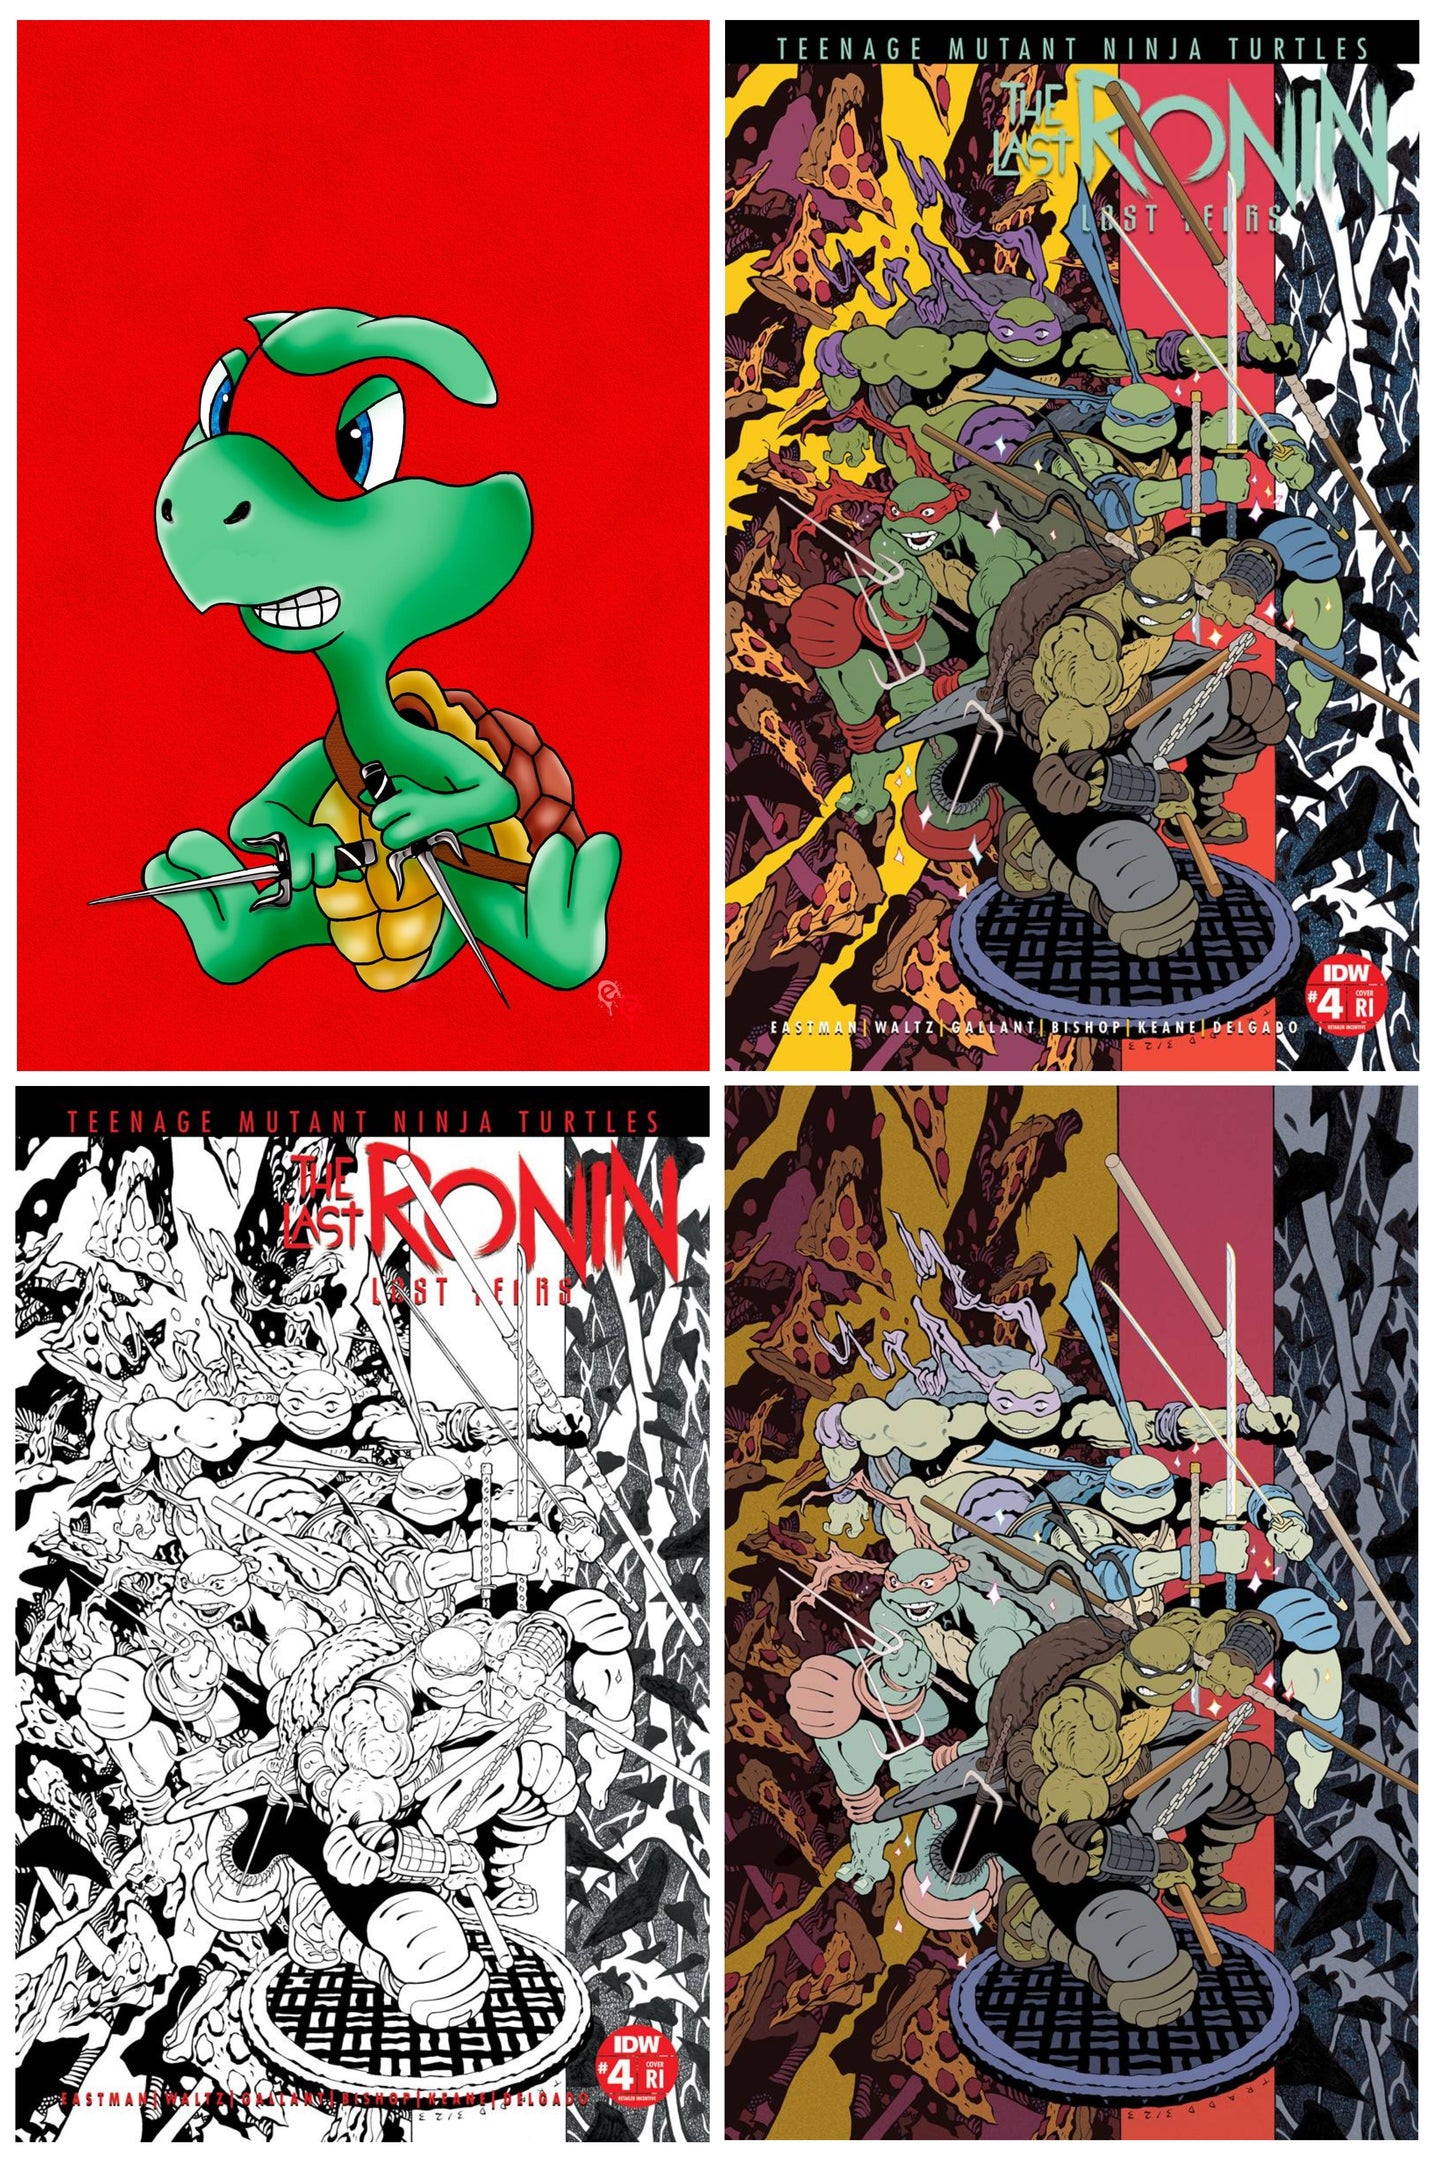 TMNT LAST RONIN LOST YEARS #4 ERIC HEARD NEGATIVE BABY VIRGIN  VARIANT LIMITED TO 777 COPIES WITH NUMBERED COA + 1:25, 1:50 & 1:100 VARIANT